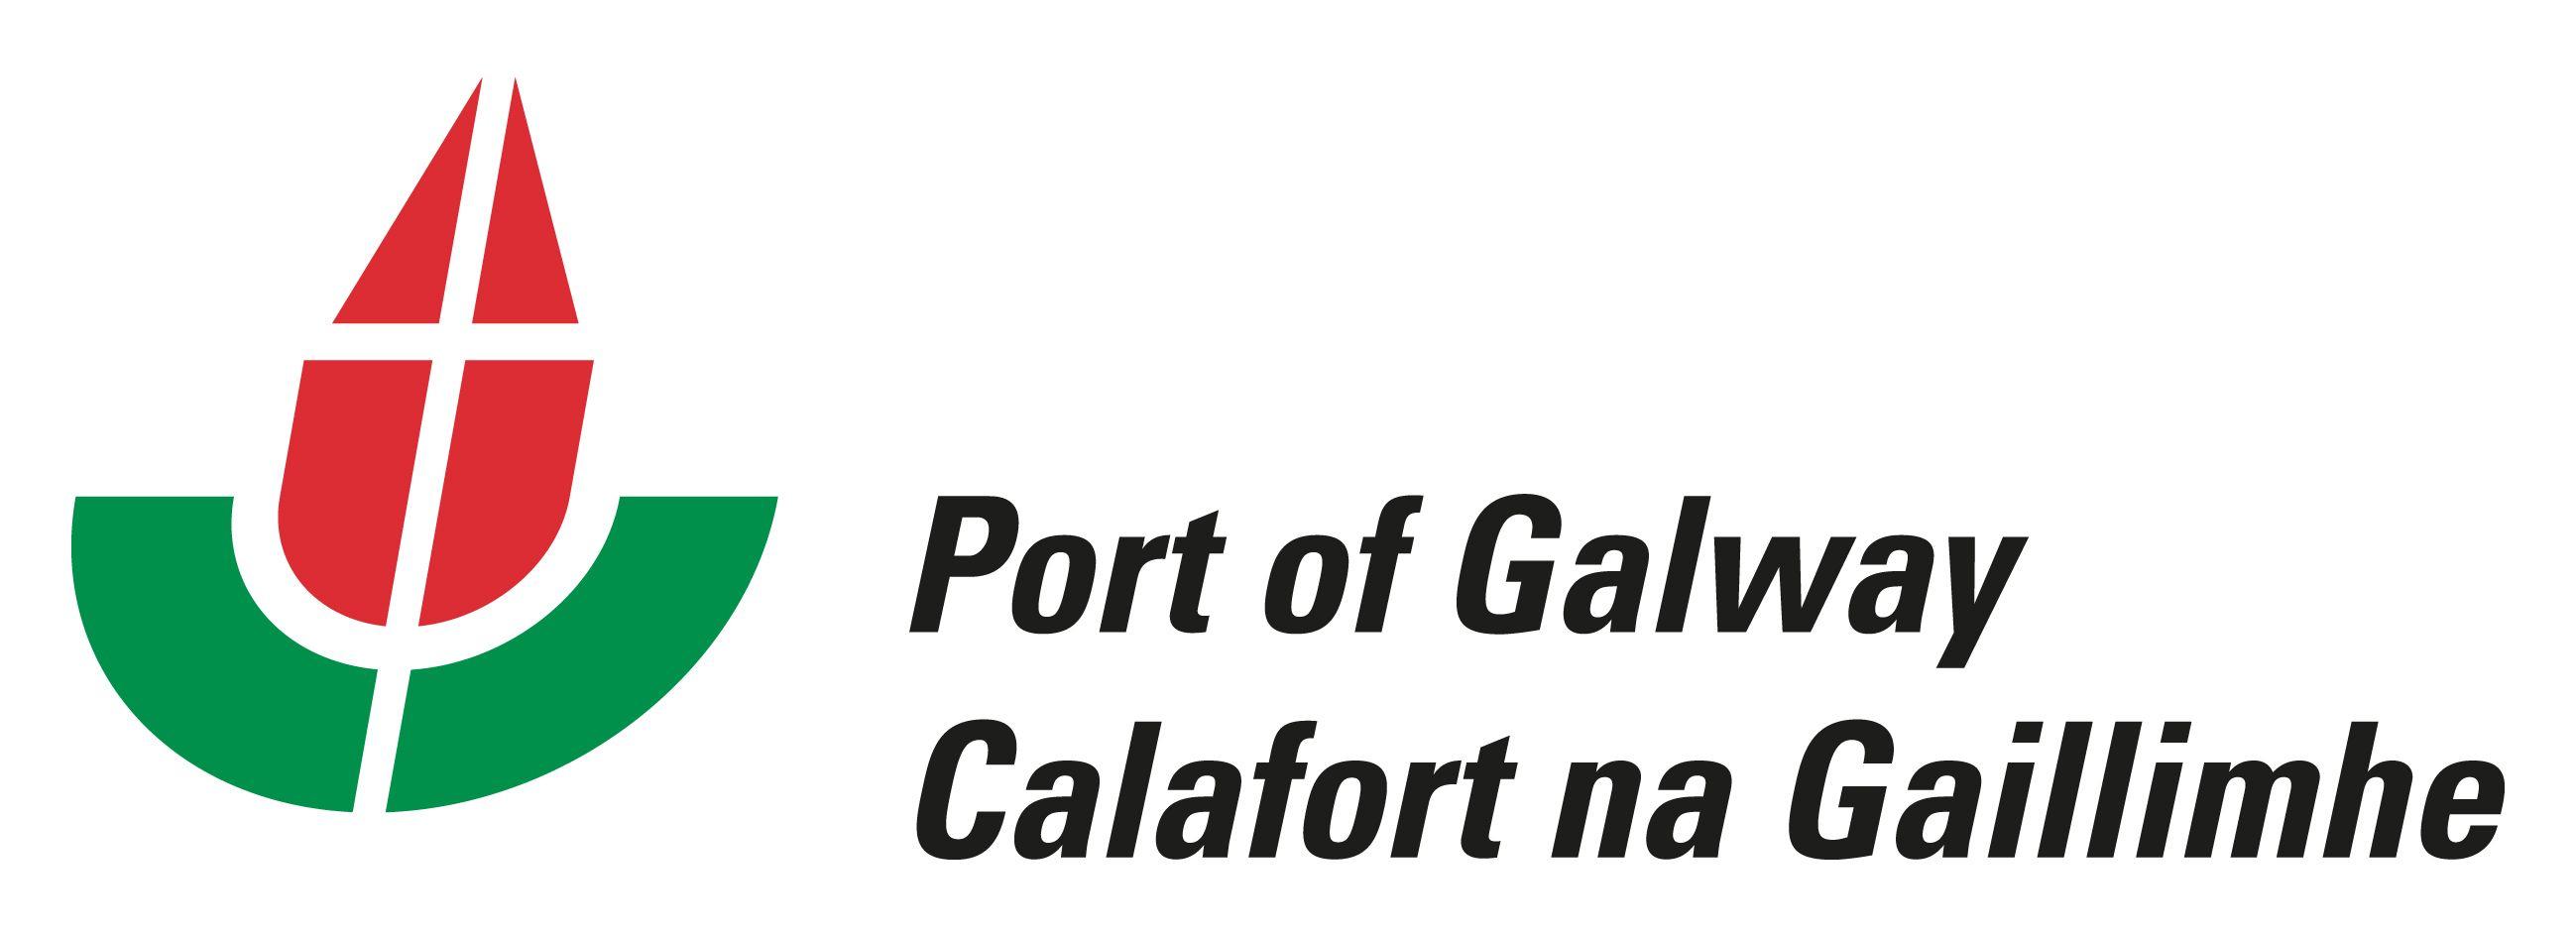 Galway Logo - Port of Galway